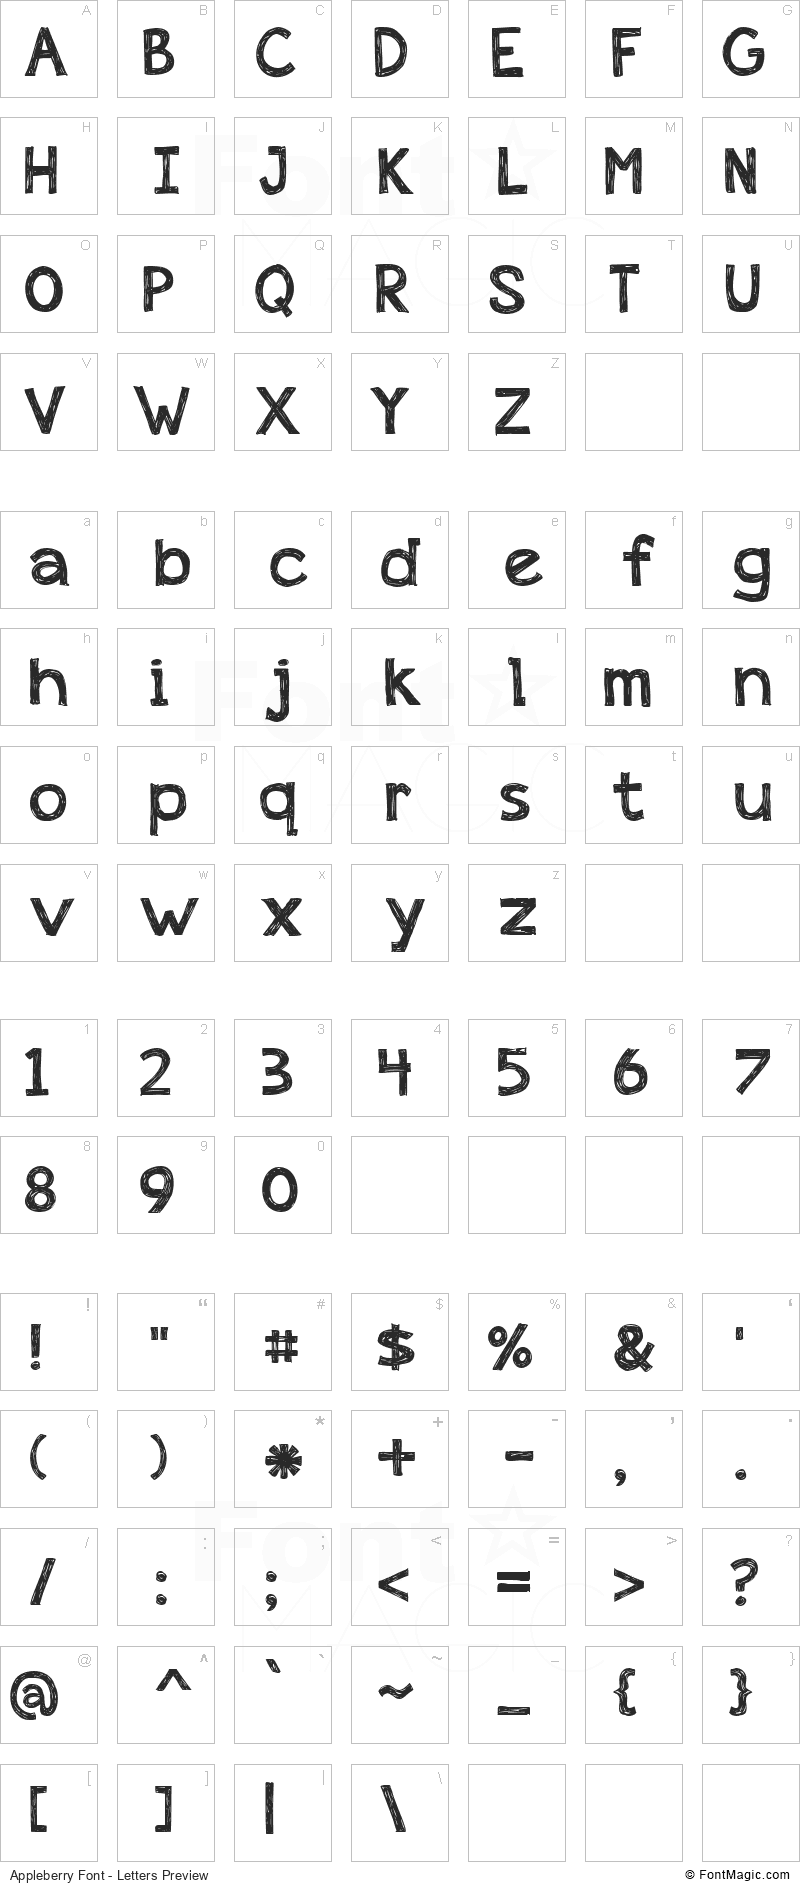 Appleberry Font - All Latters Preview Chart